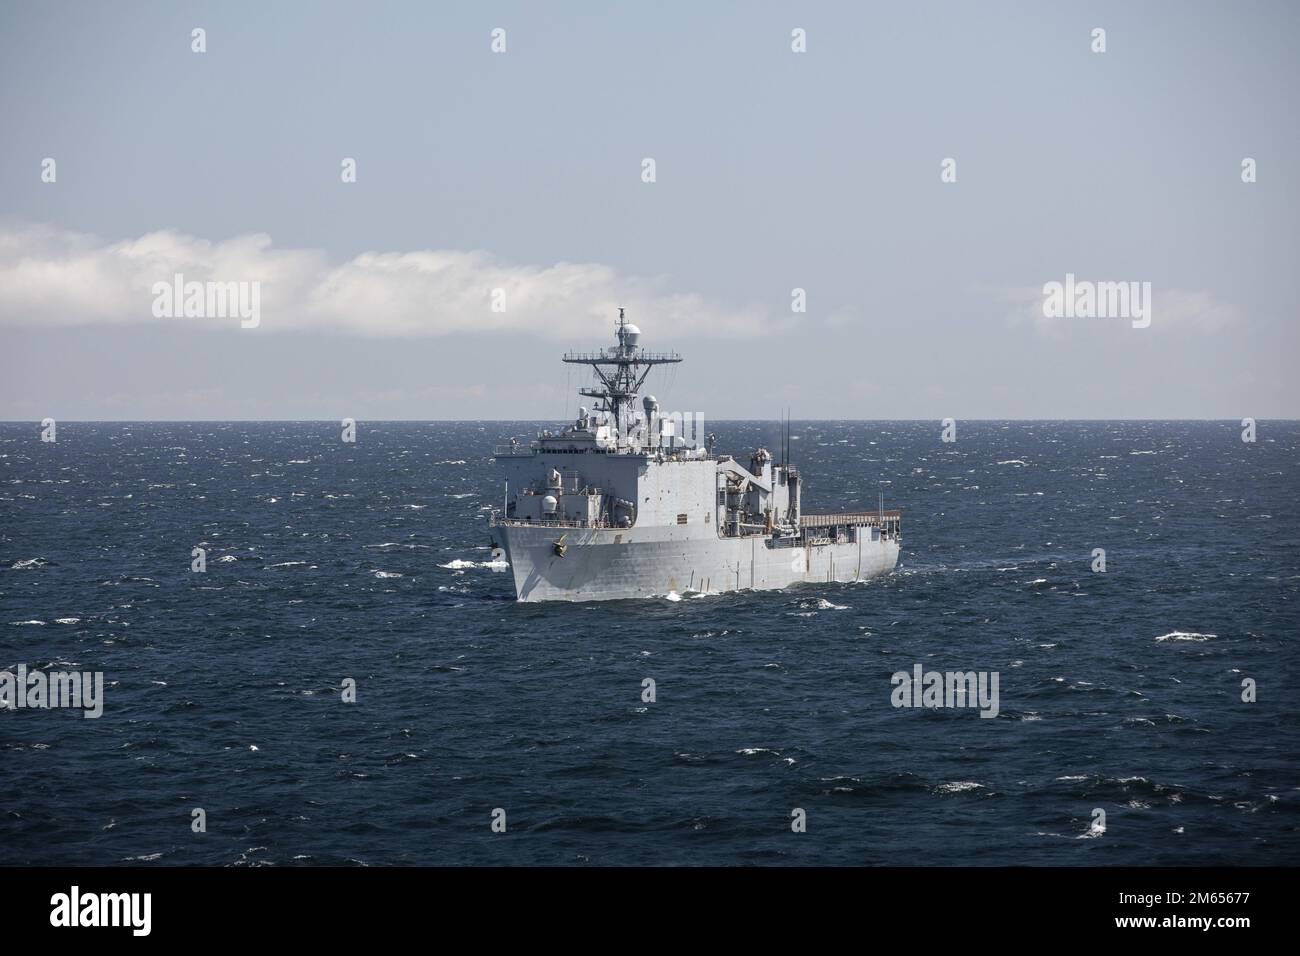 BALTIC SEA (May 16, 2022) - Whidbey Island-class amphibious dock landing ship USS Gunston Hall (LSD 44), sails alongside the Wasp-class amphibious assault ship USS Kearsarge (LHD 3) during maneuvering exercises with the Finnish Navy in the Baltic Sea, May 16, 2022. Kearsarge, flagship of the Kearsarge ARG/MEU team, is on a scheduled deployment under the command and control of Task Force 61/2 while operating in U.S. Sixth Fleet in support of U.S., Allied and partner interests in Europe and Africa. Stock Photo